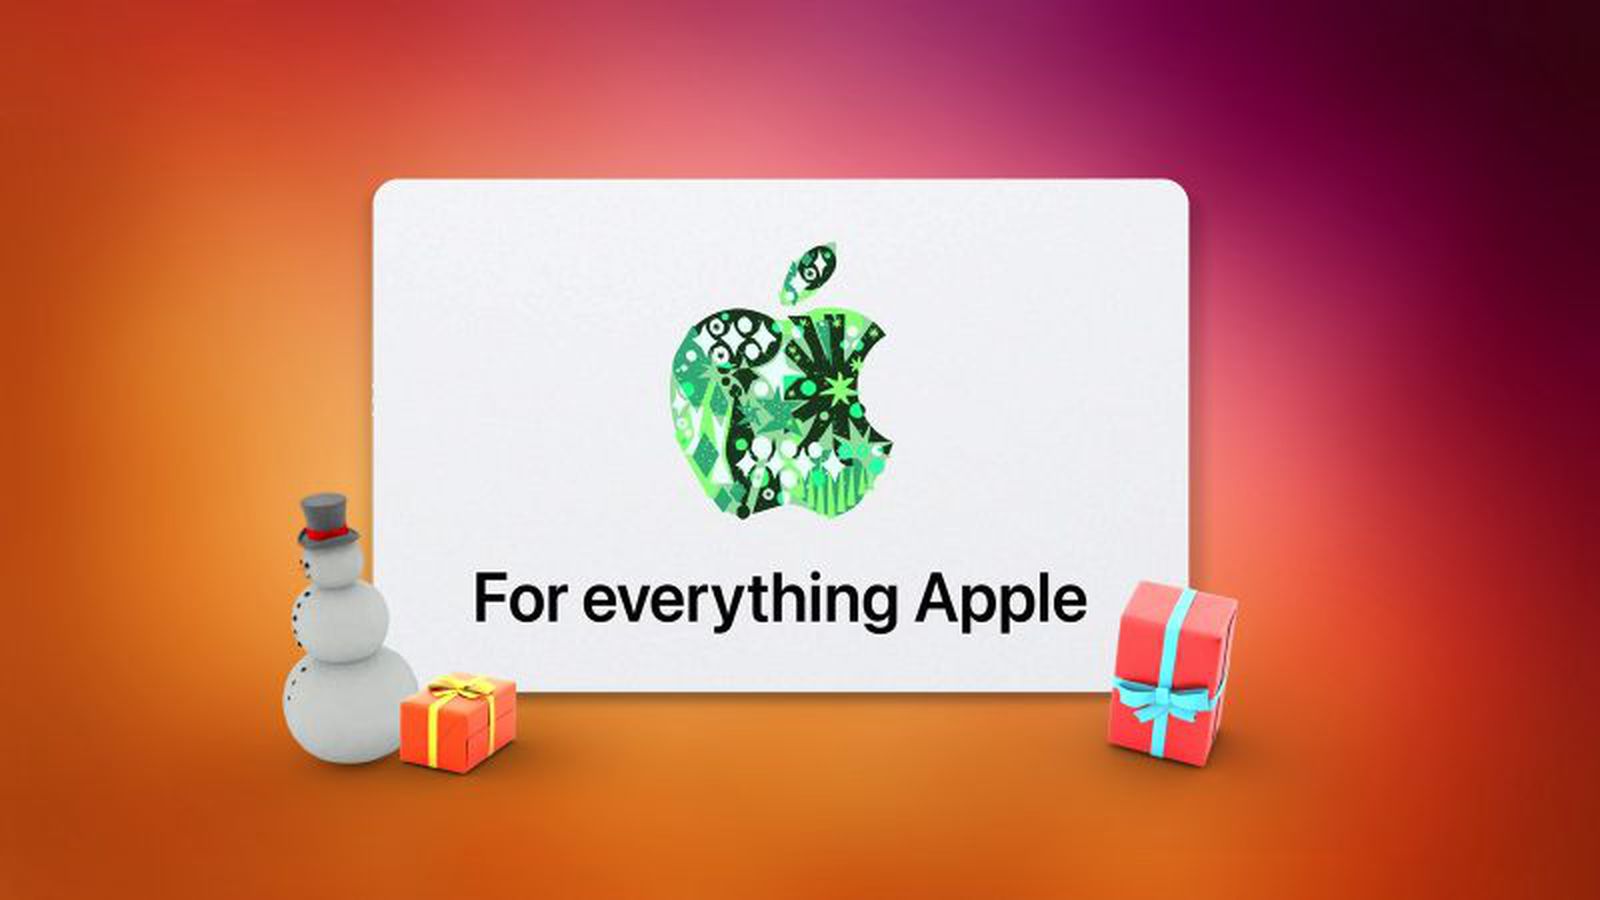 Buy Gift the What - With Card to MacRumors Apple You Unwrapped